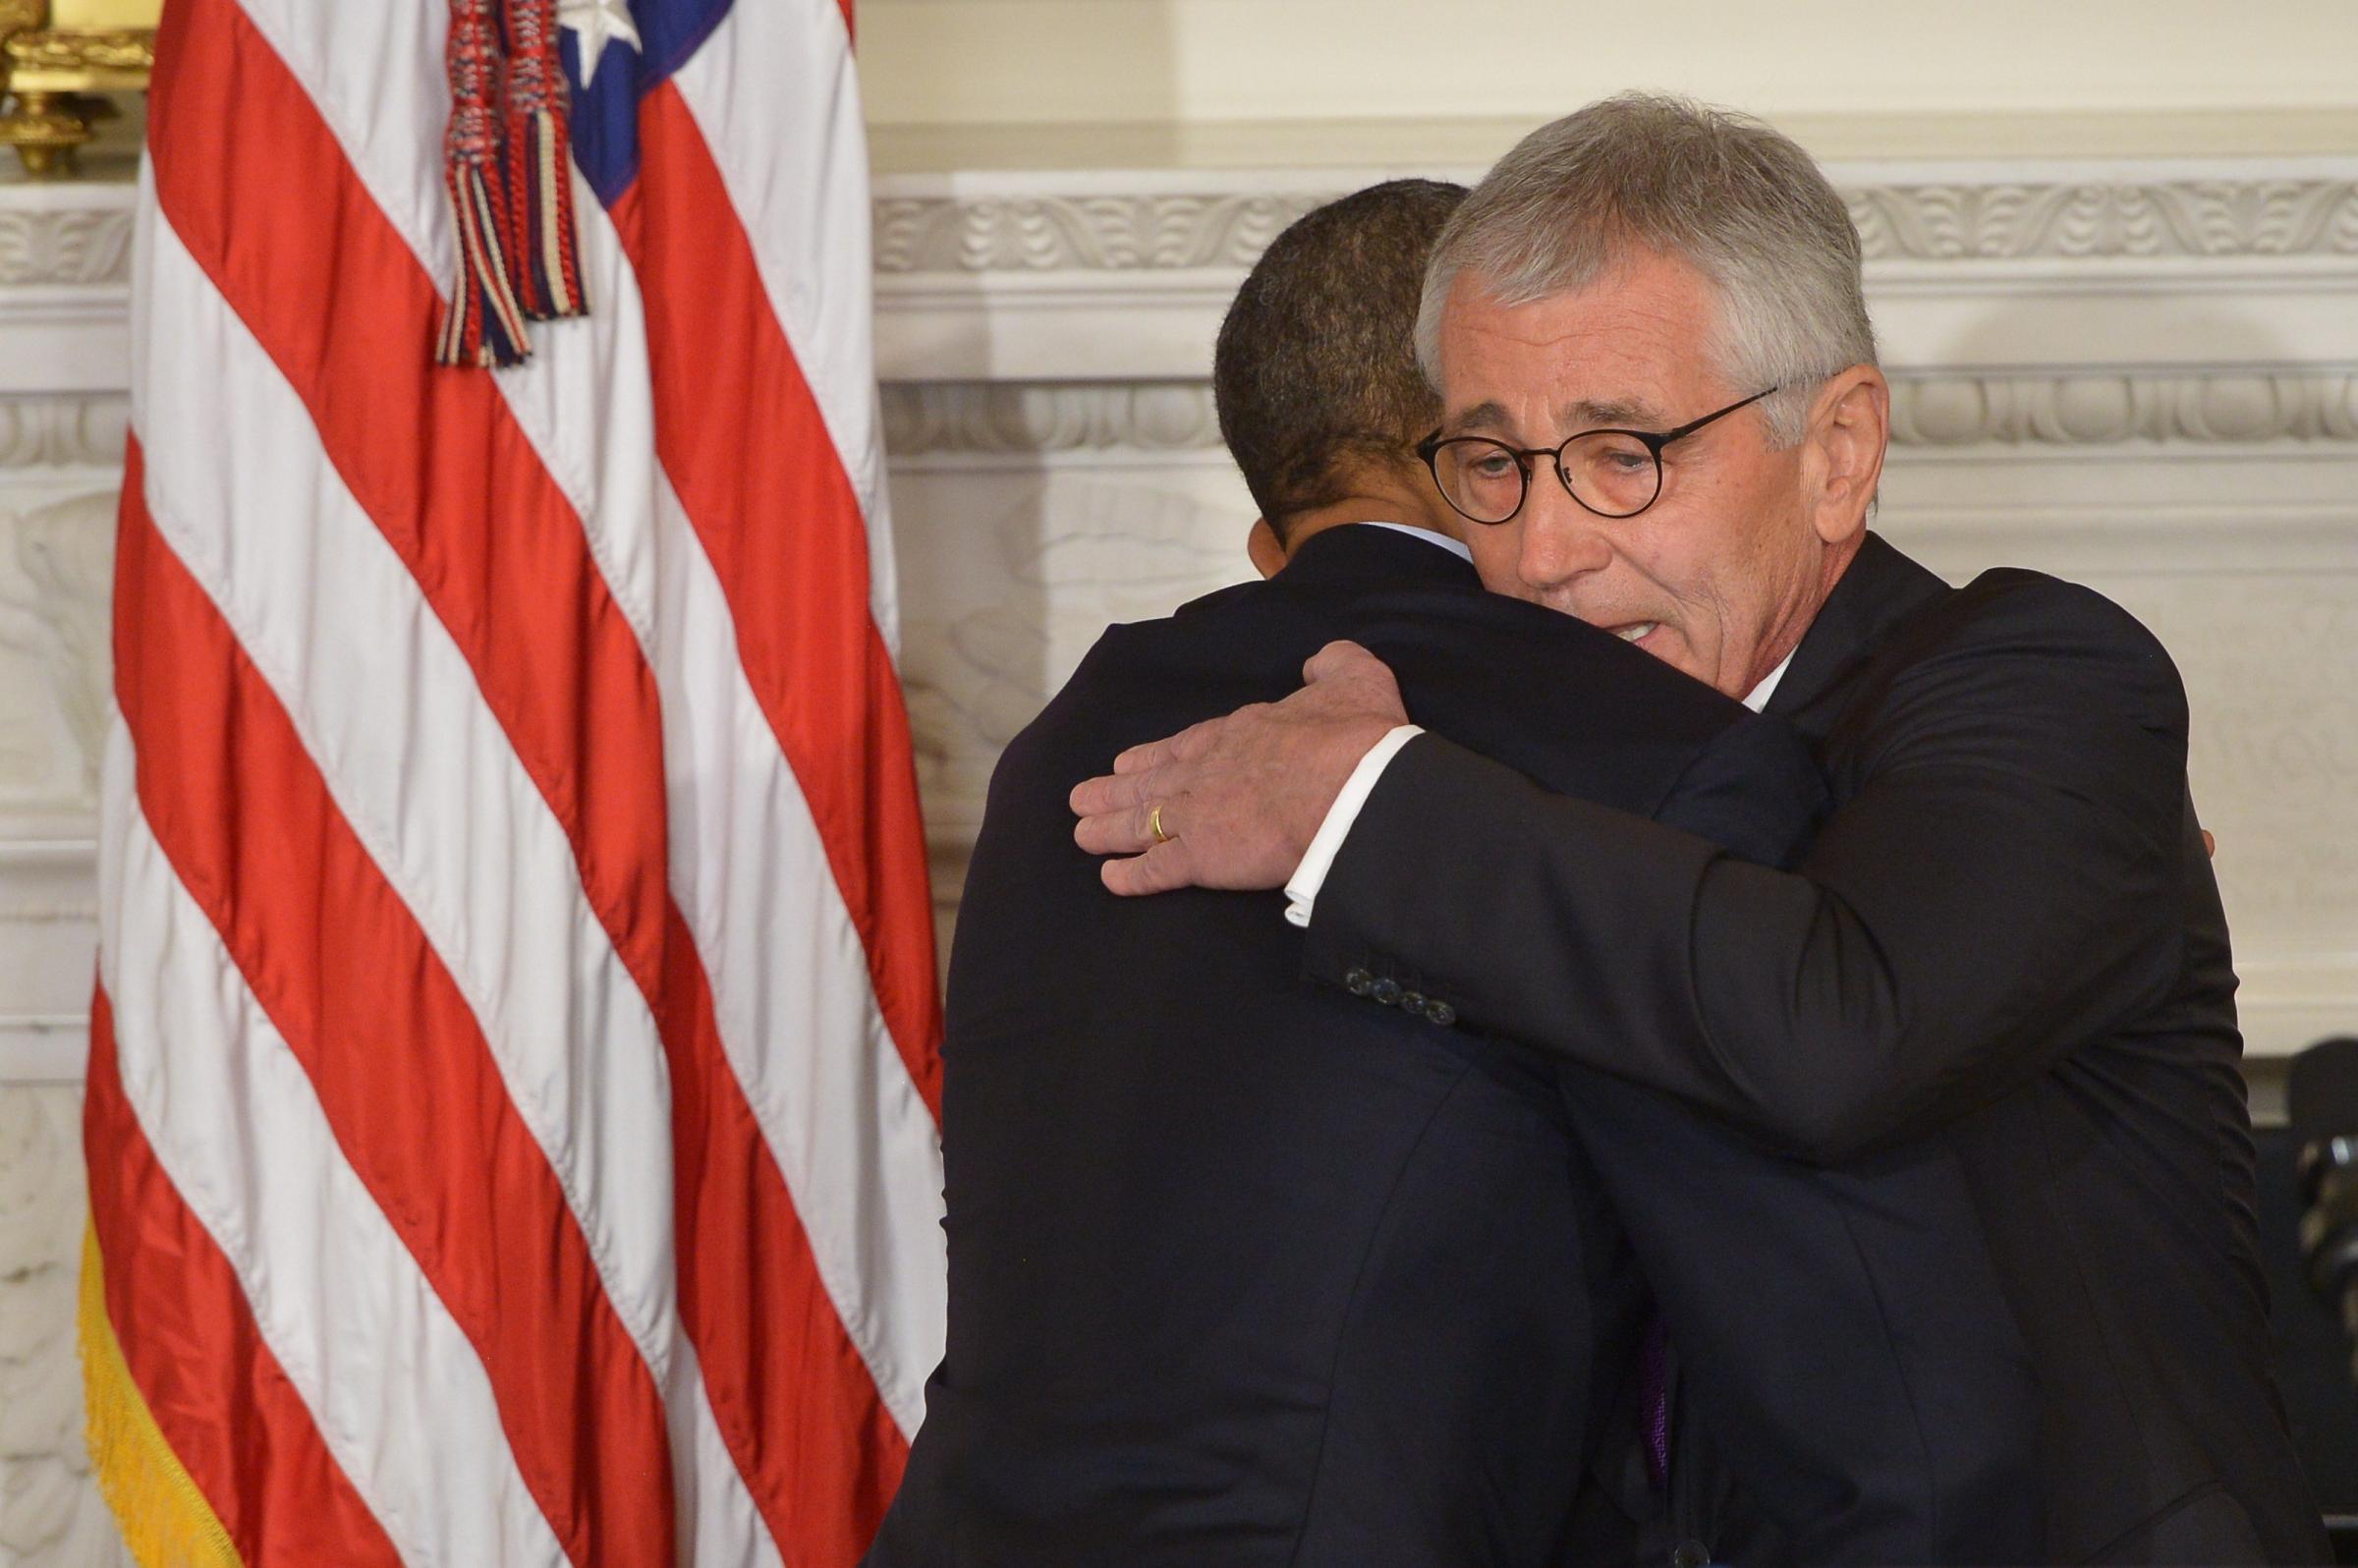 President Barack Obama and Defense Secretary Chuck Hagel embrace during a press conference to announce Hagel's departure at the White House on Nov. 24, 2014 in Washington, DC.